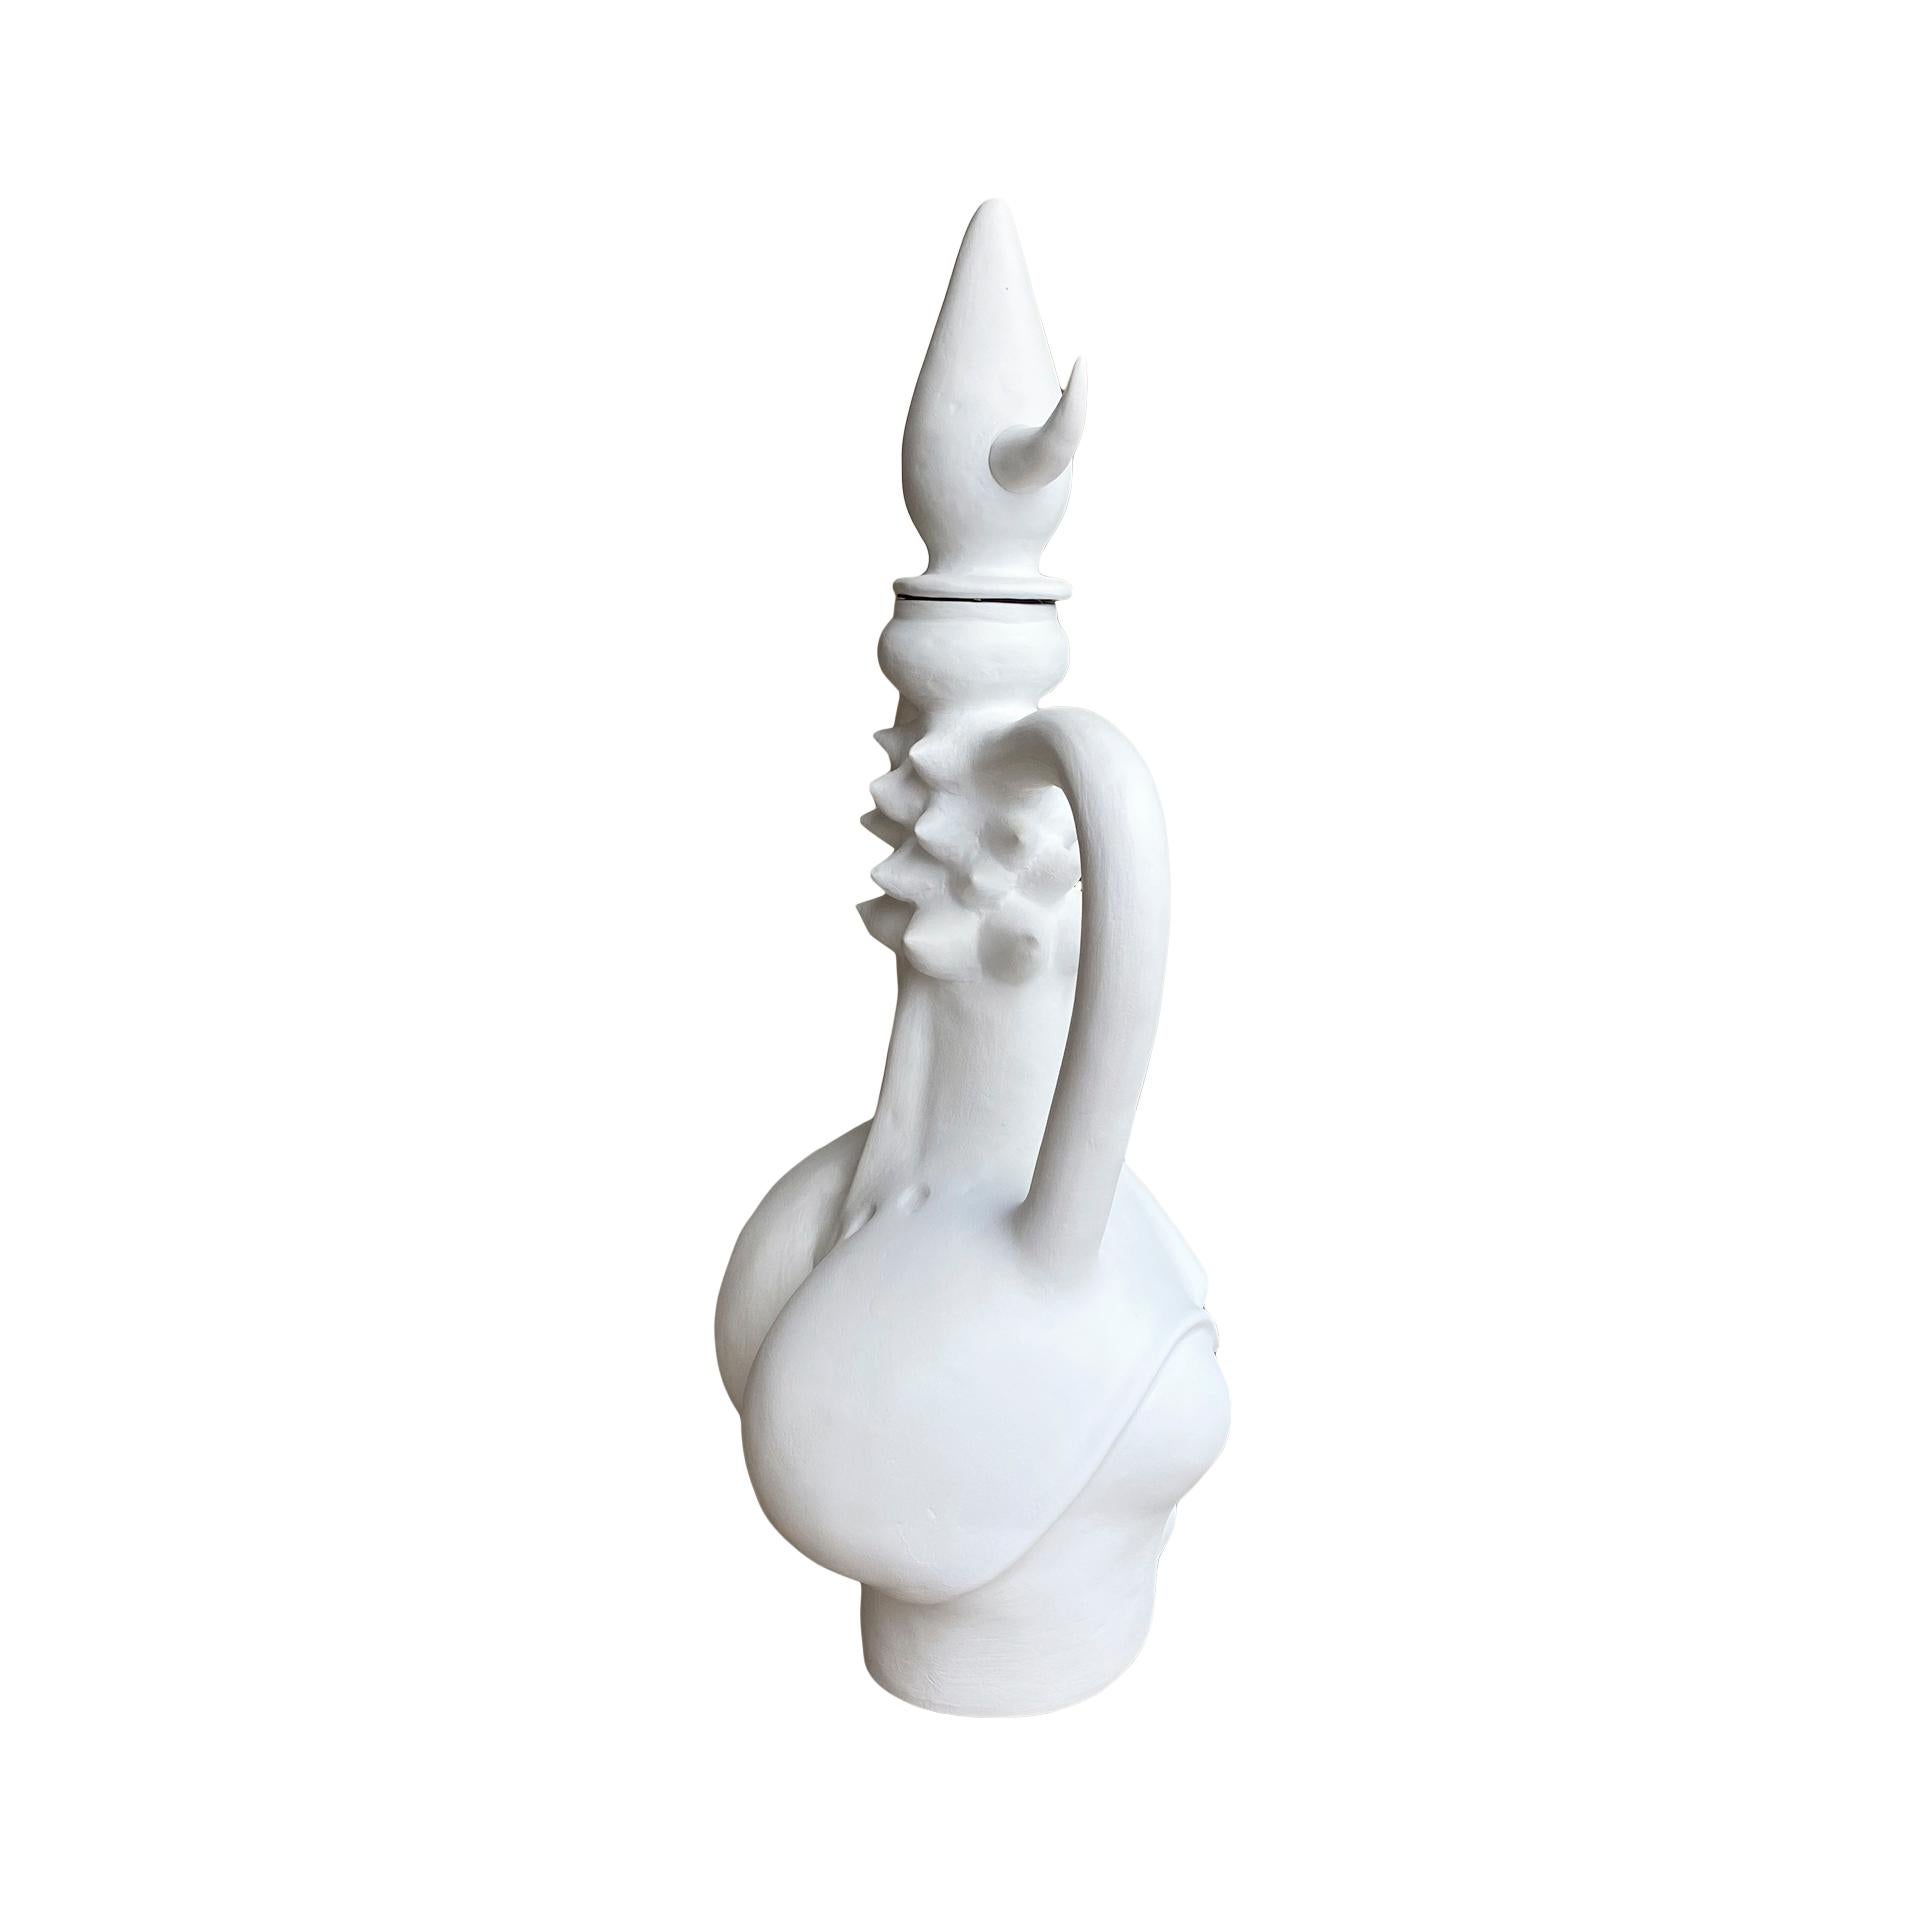 Amphora sculpture with Vulva by Papin Lucadamo made in refractary clay. 

In his last works Papin Lucadamo analyzes in a conceptual way a synthesis between traditional craftsmanship and motifs reminiscent of the most primitive sculptures such as the